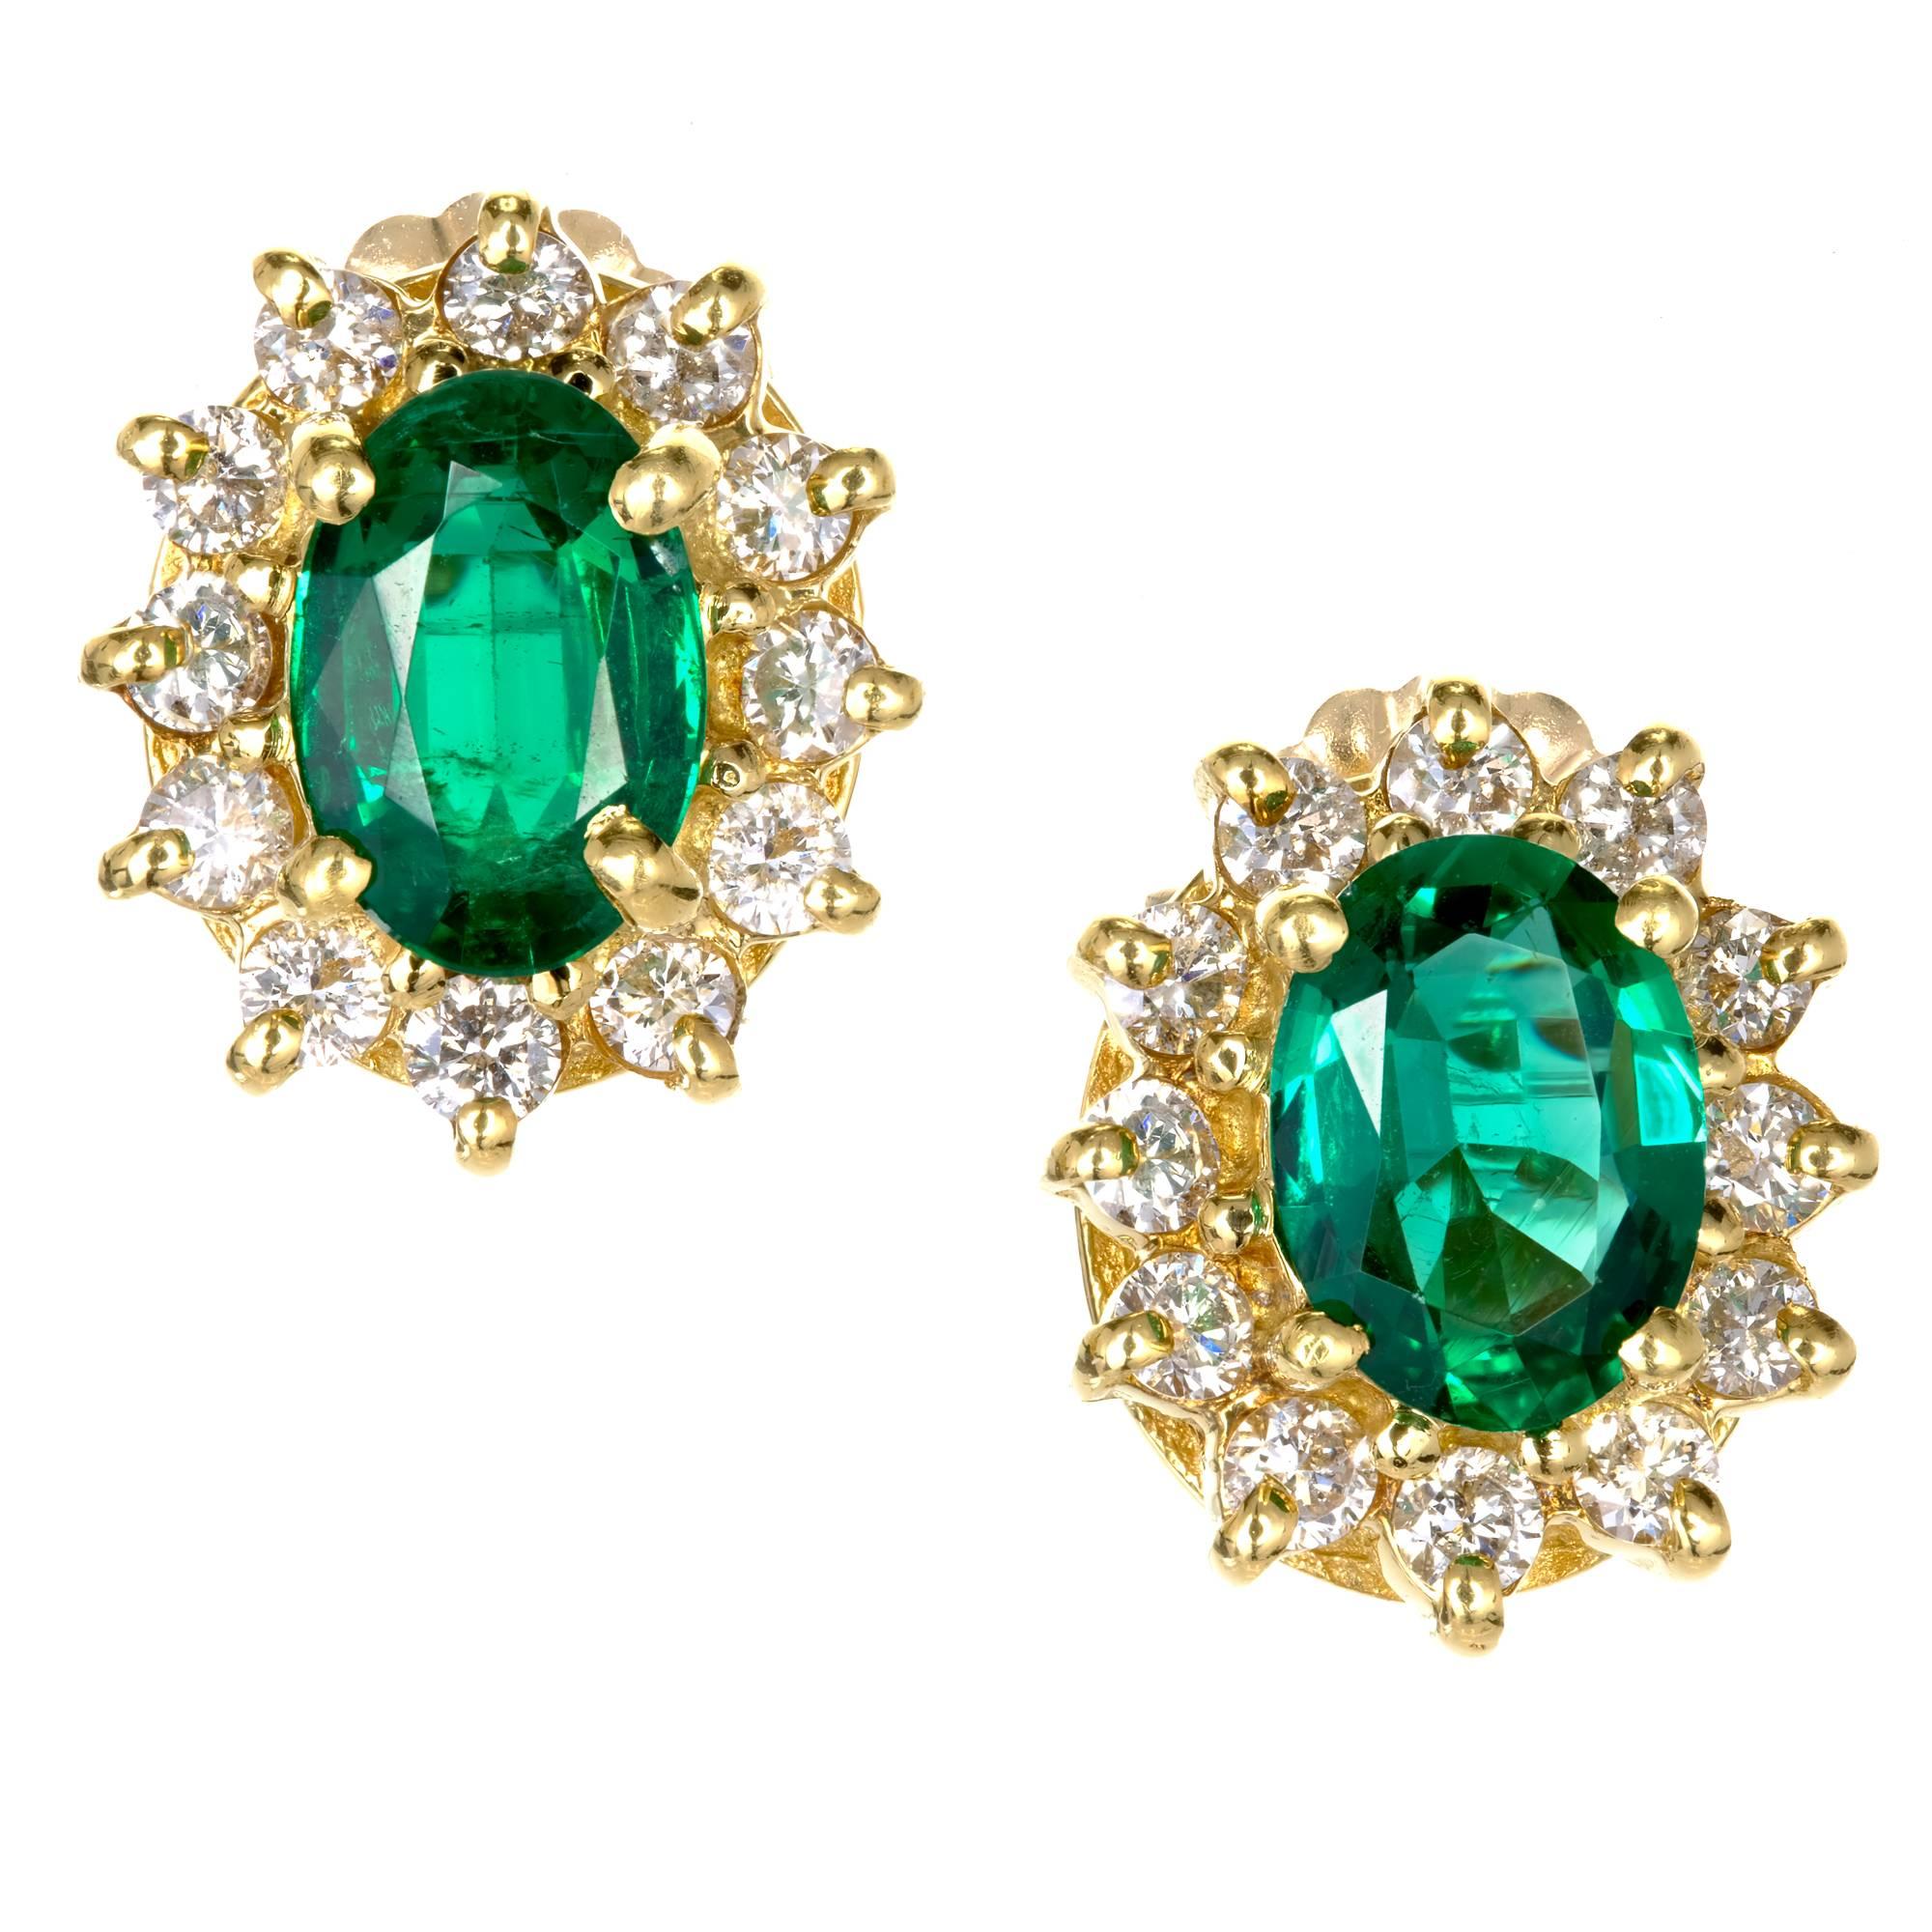 Bright green clear emeralds 1.80cts total surrounded by a halo of white full cut diamonds in a 14k yellow gold setting.

2 top gem green genuine Emeralds 7 x 5mm oval approx. total weight 1.80cts   Simple oil only and no other enhancements.
24 full